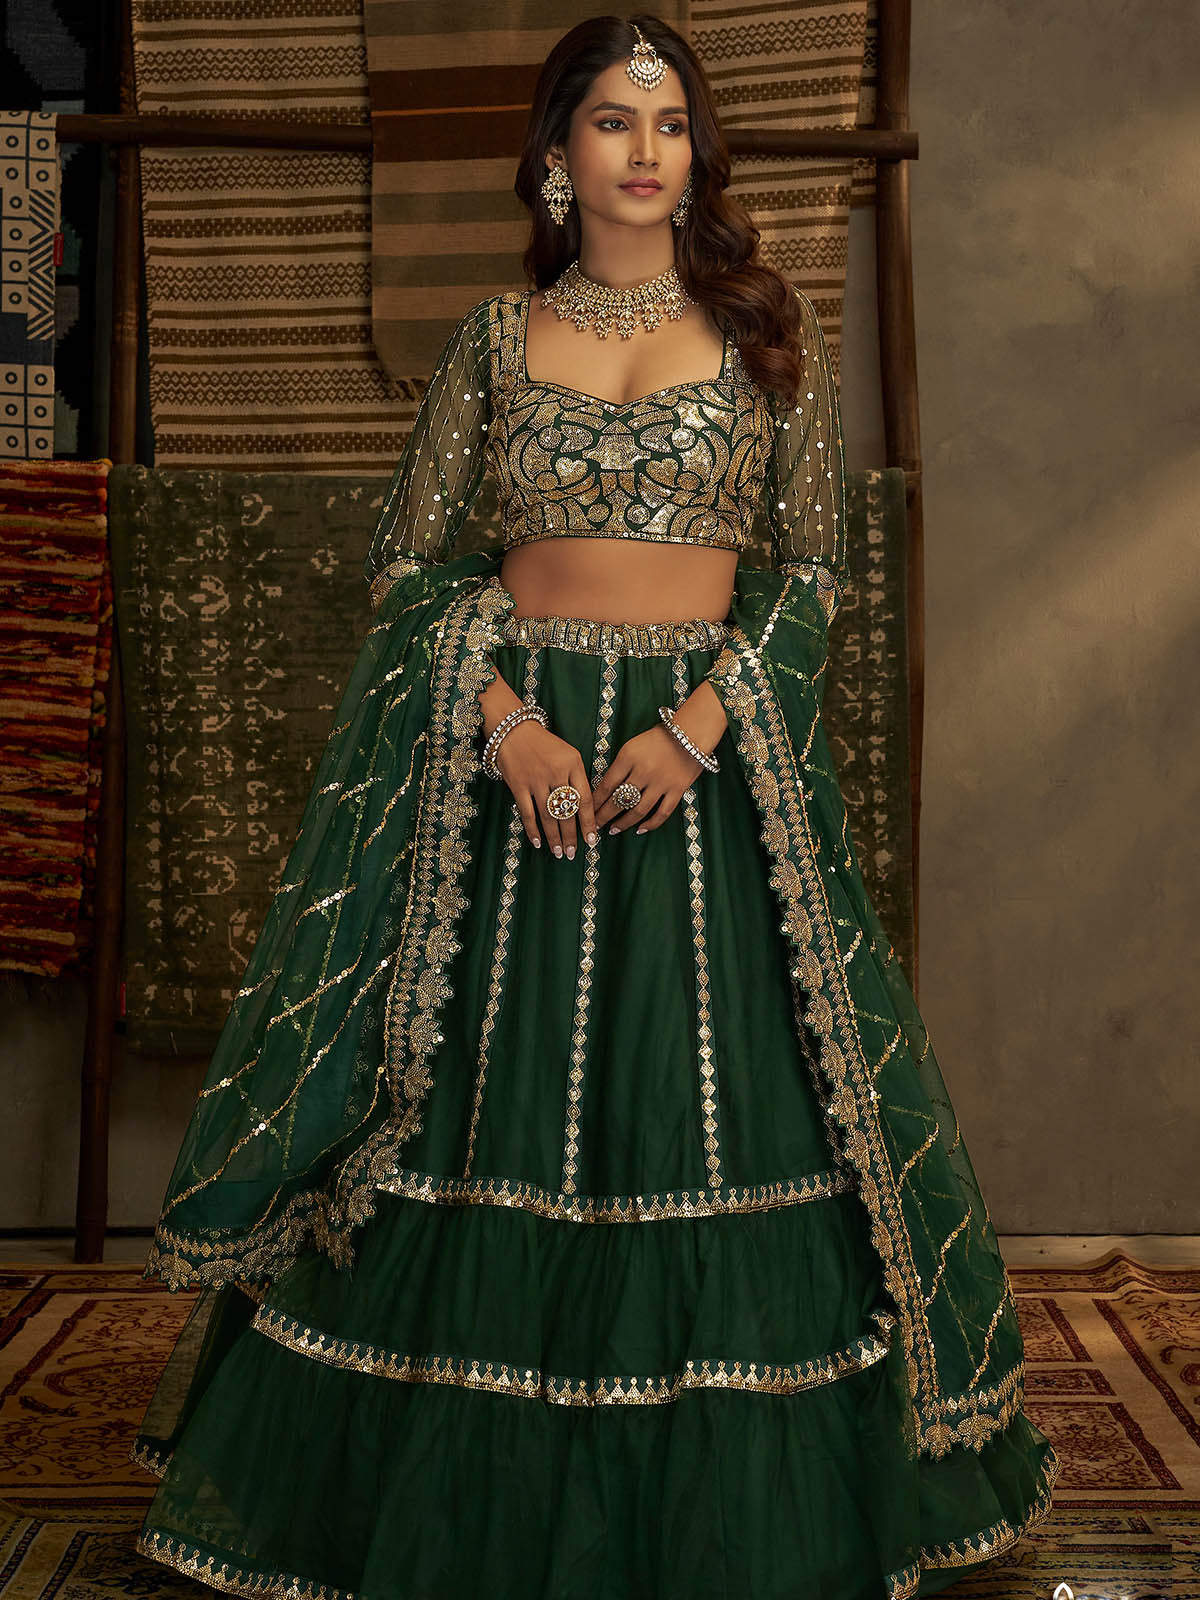 Bottle Green & Gold Mirror Embroidered Lehenga Set Design by Seema Gujral  at Pernia's Pop Up Shop 2023